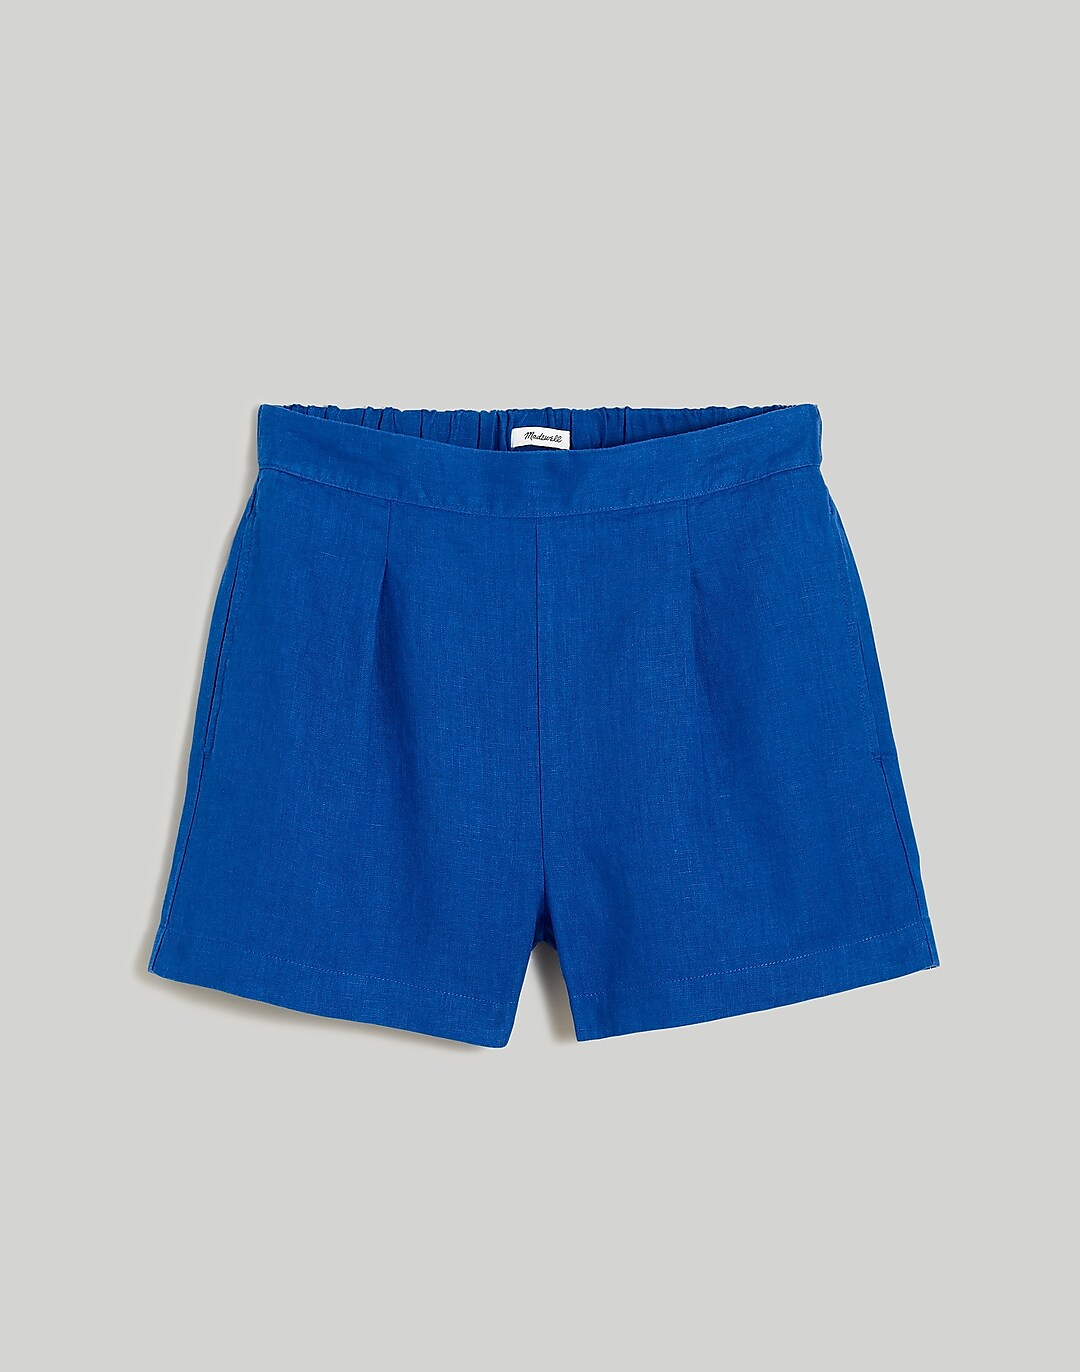 Clean Pull-On Shorts in 100% Linen